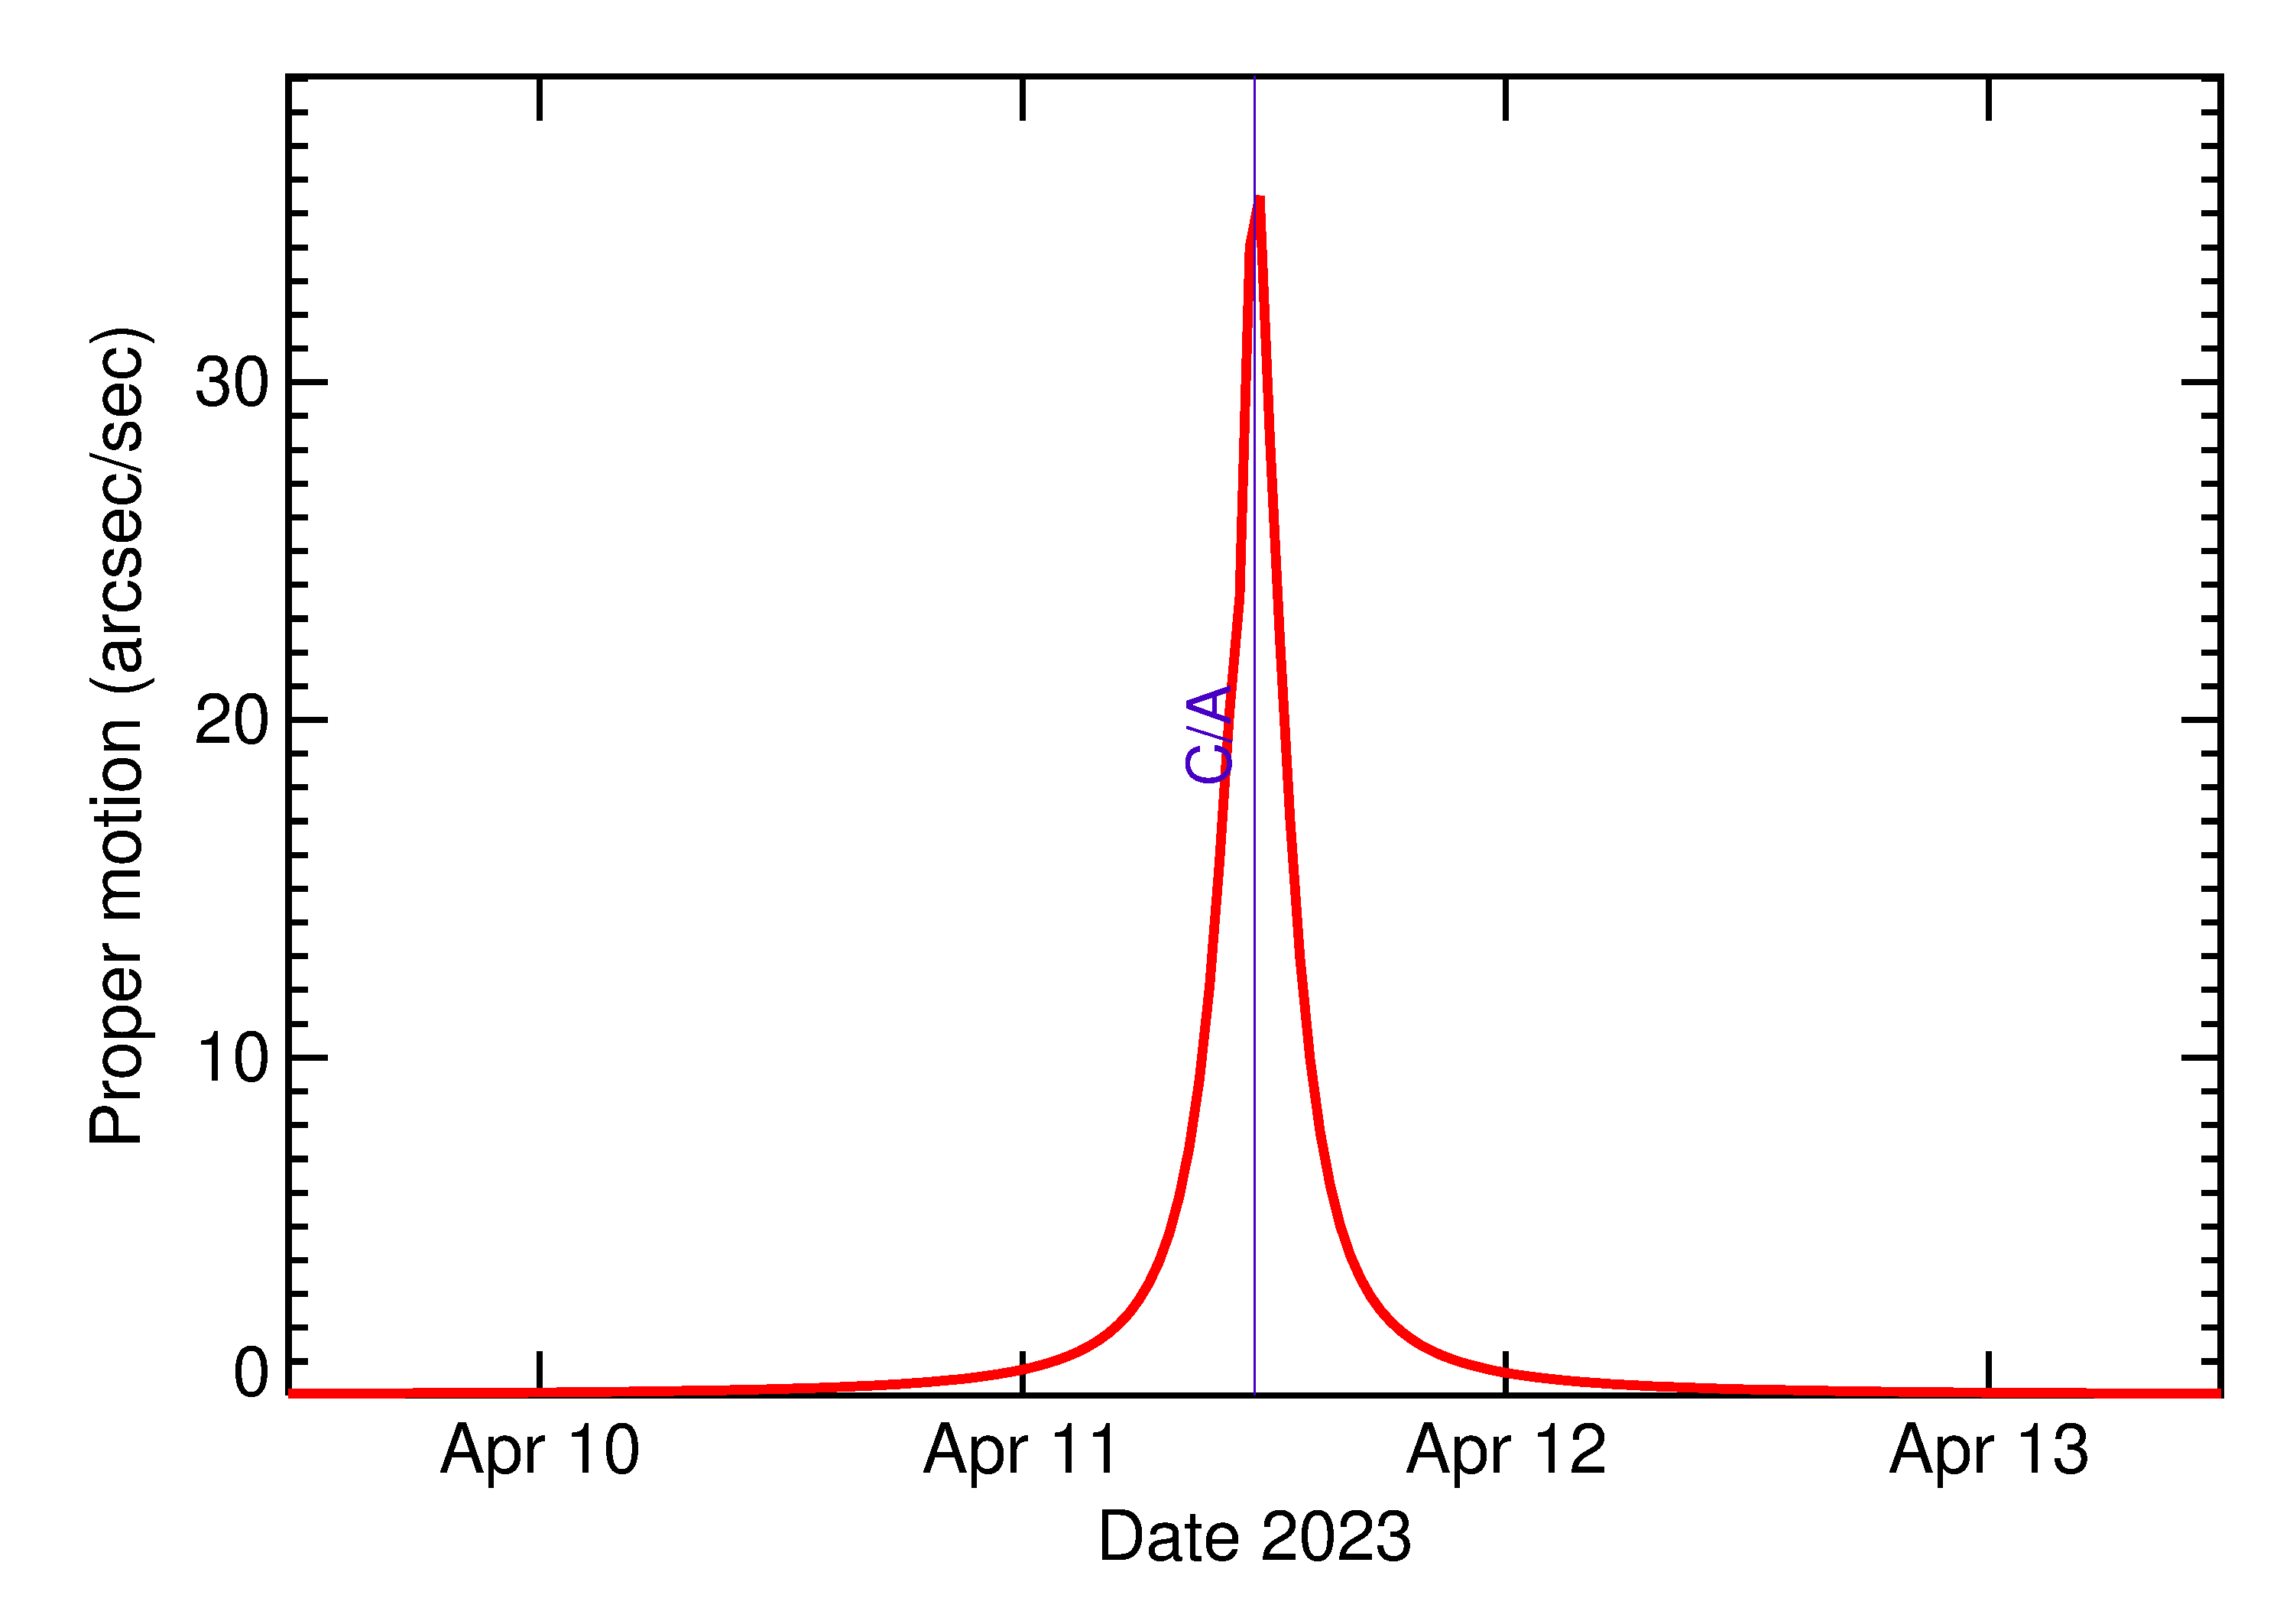 Proper motion rate of 2023 GQ in the days around closest approach